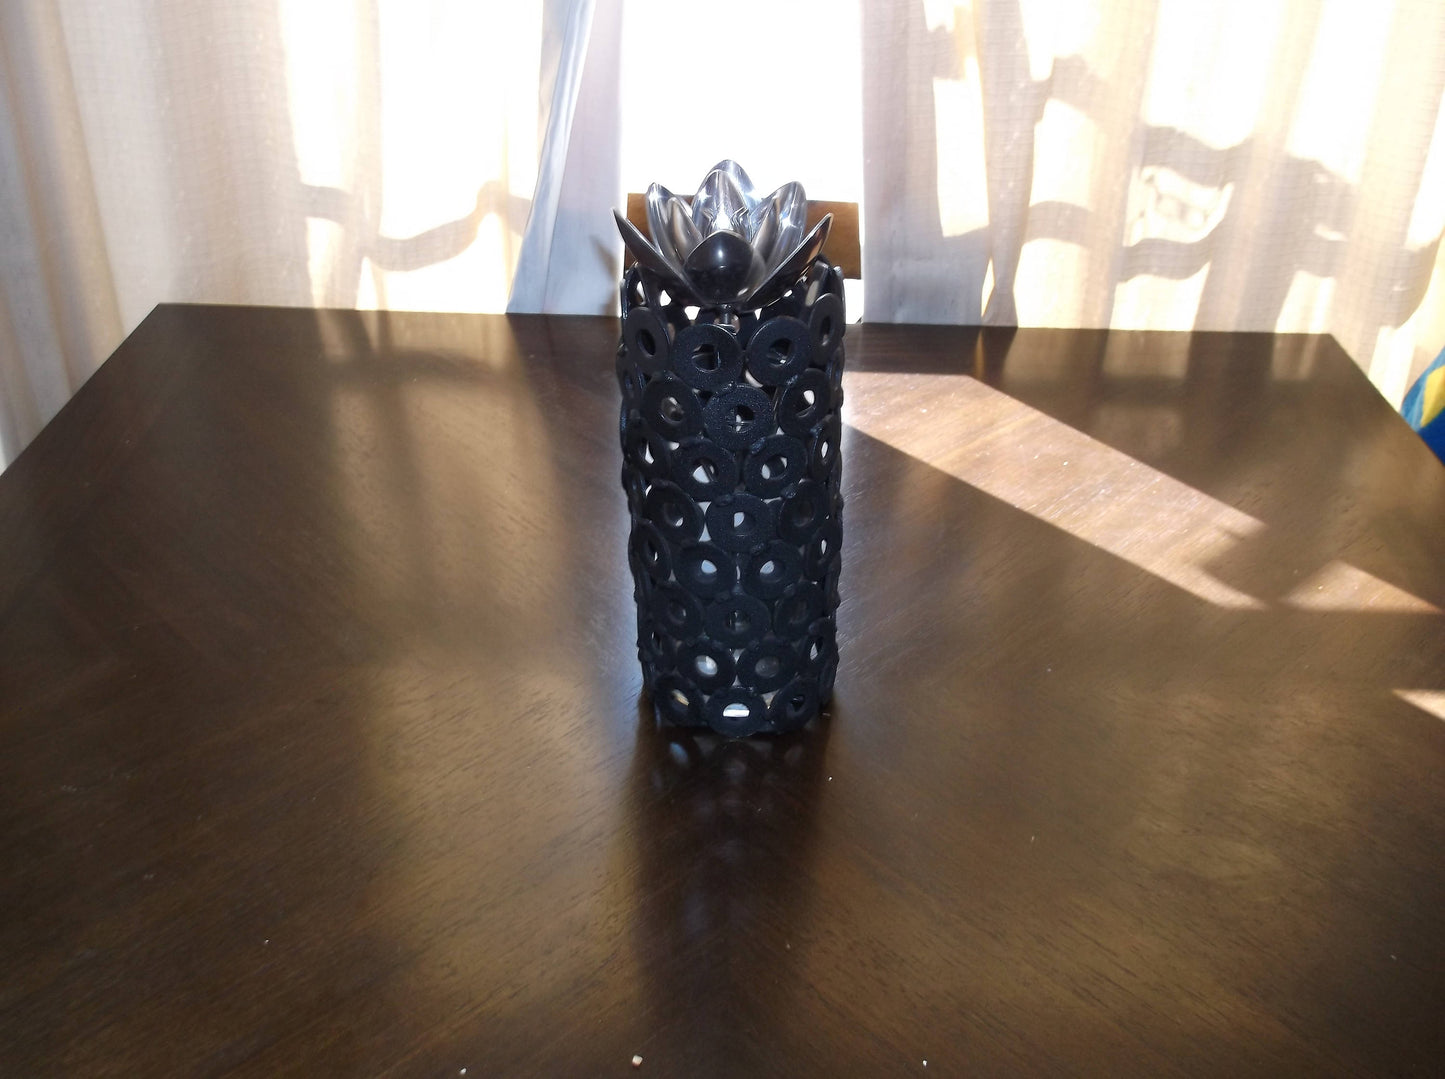 Black Vase, Metal Home Decor, Recycled Art and Sculpture